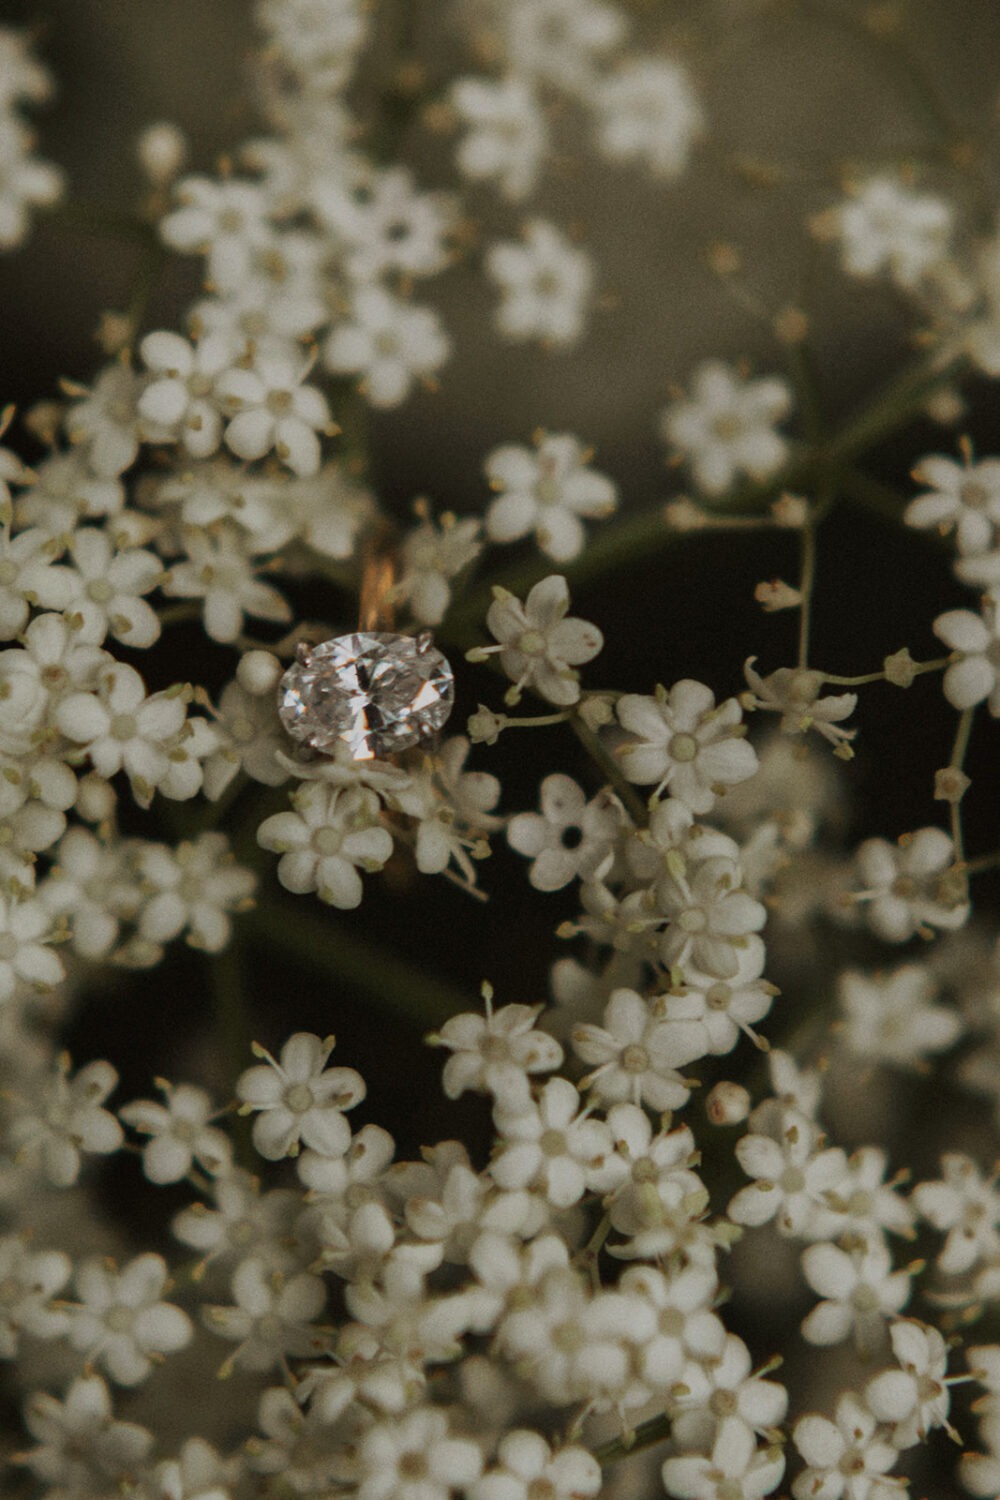 engagement ring sits in white flower